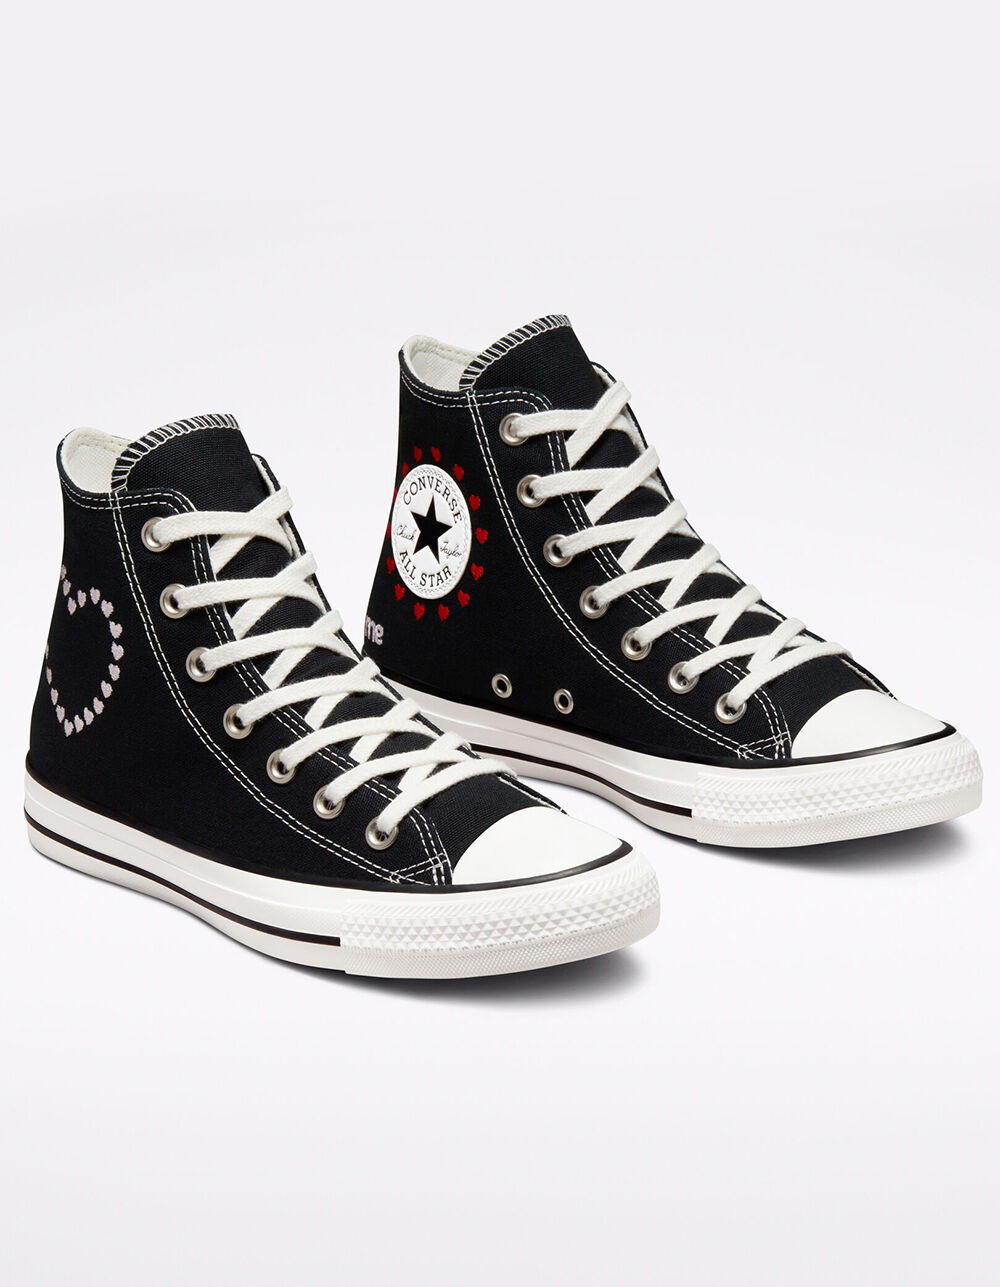 Converse Chuck Taylor All Star heart embroidery sneakers in white